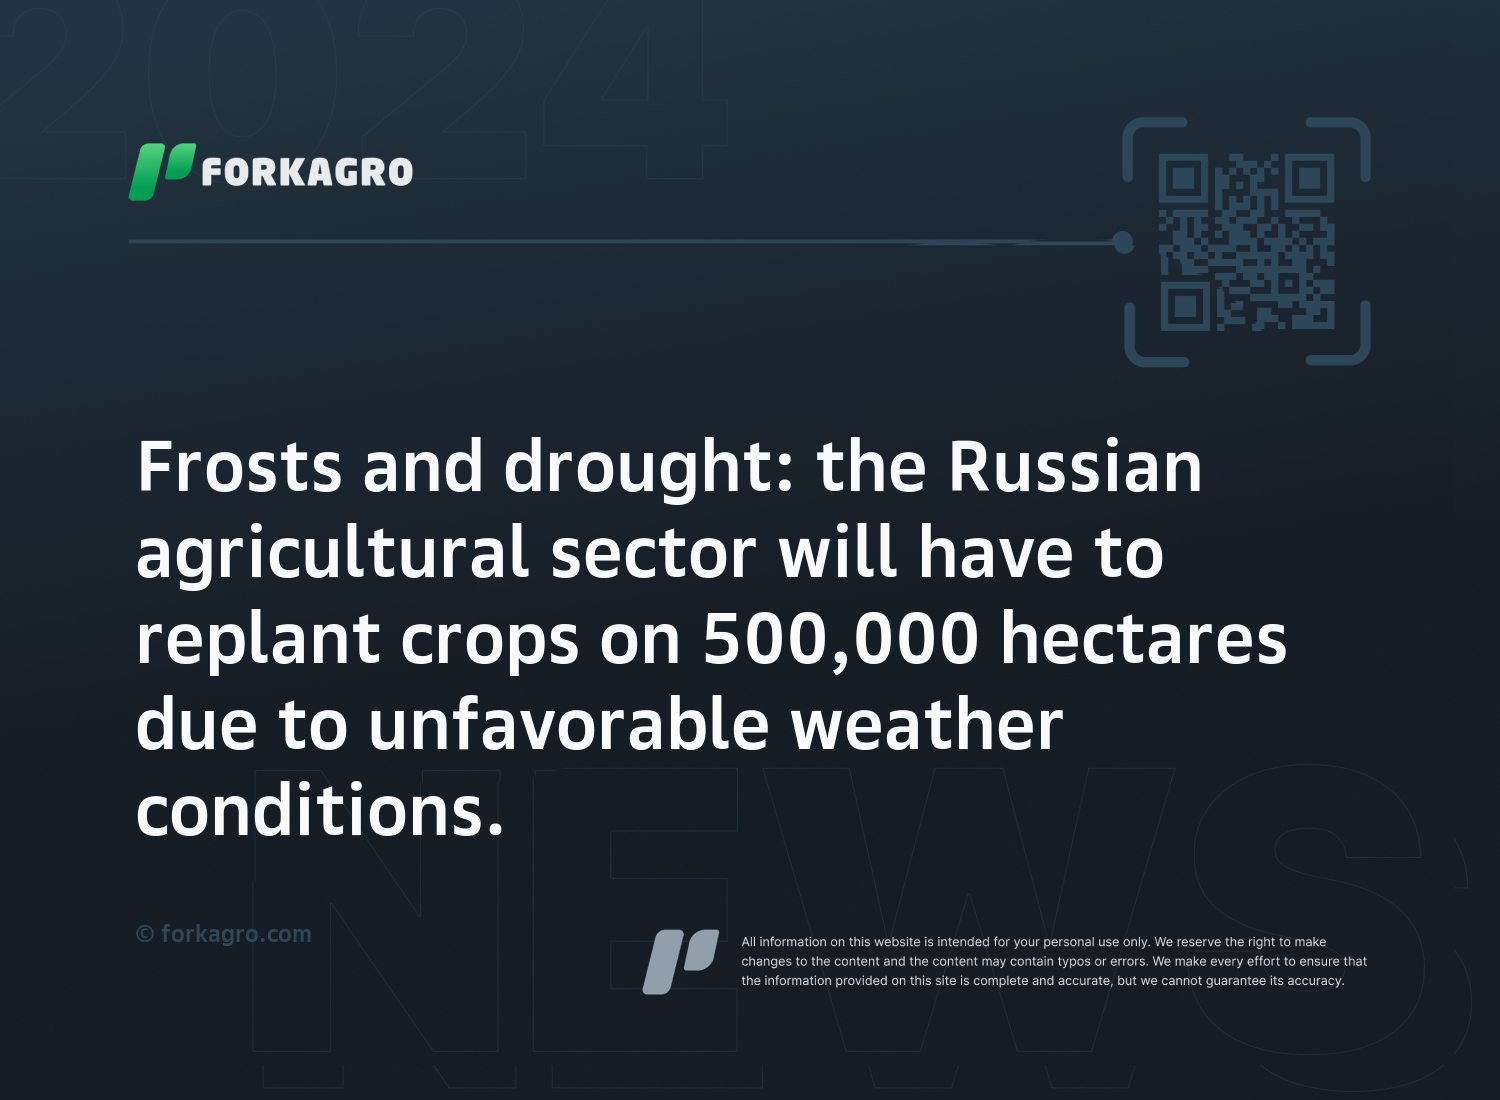 Frosts and drought: the Russian agricultural sector will have to replant crops on 500,000 hectares due to unfavorable weather conditions.